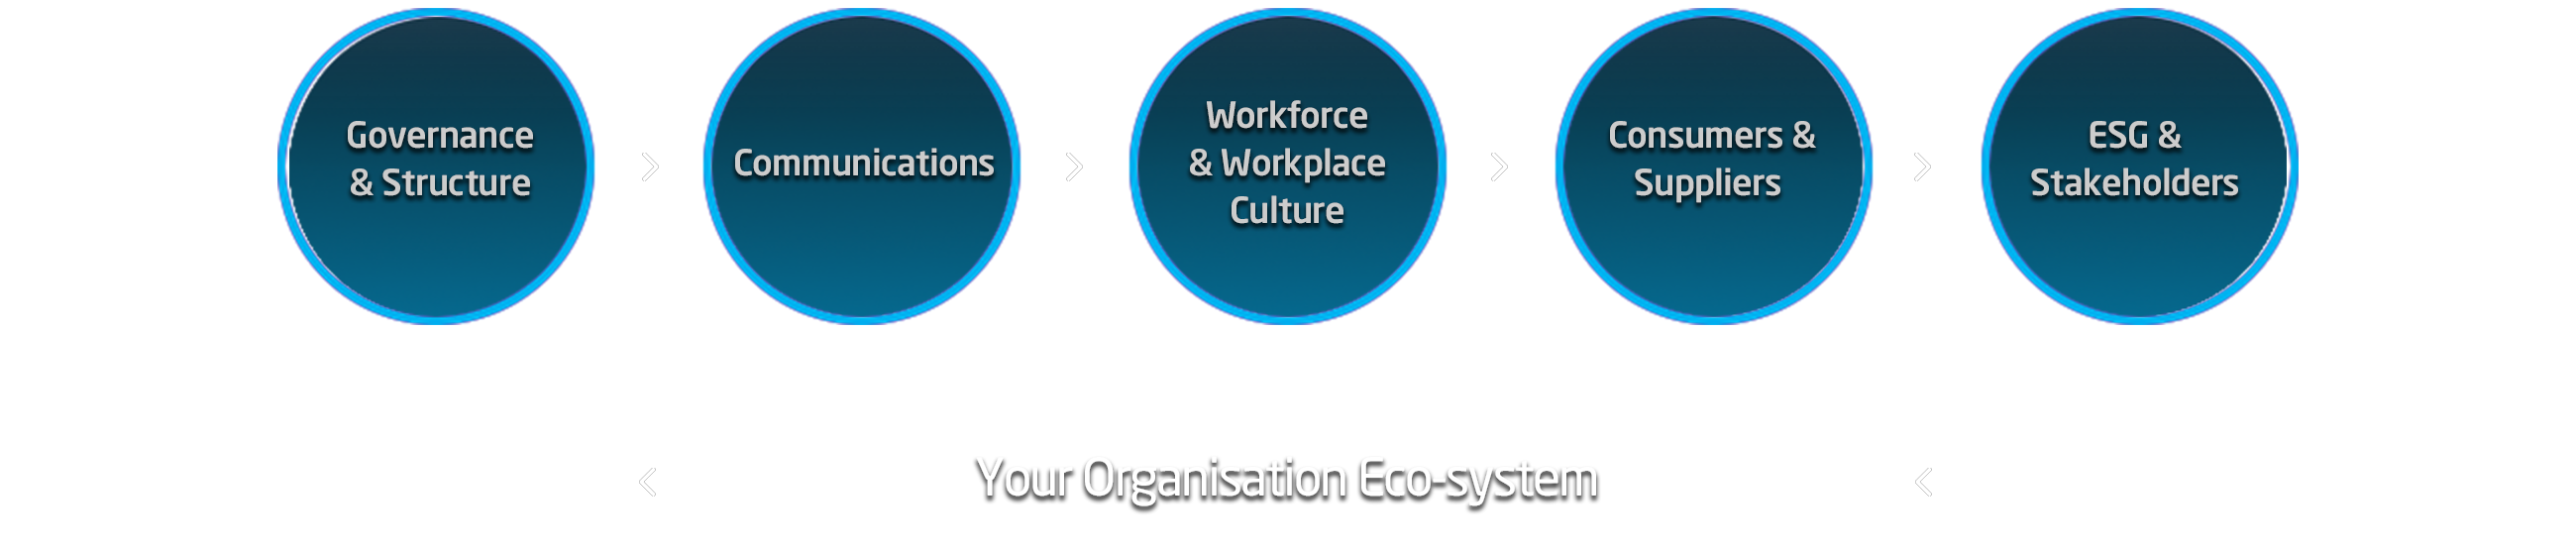 Your Organisation Eco-system